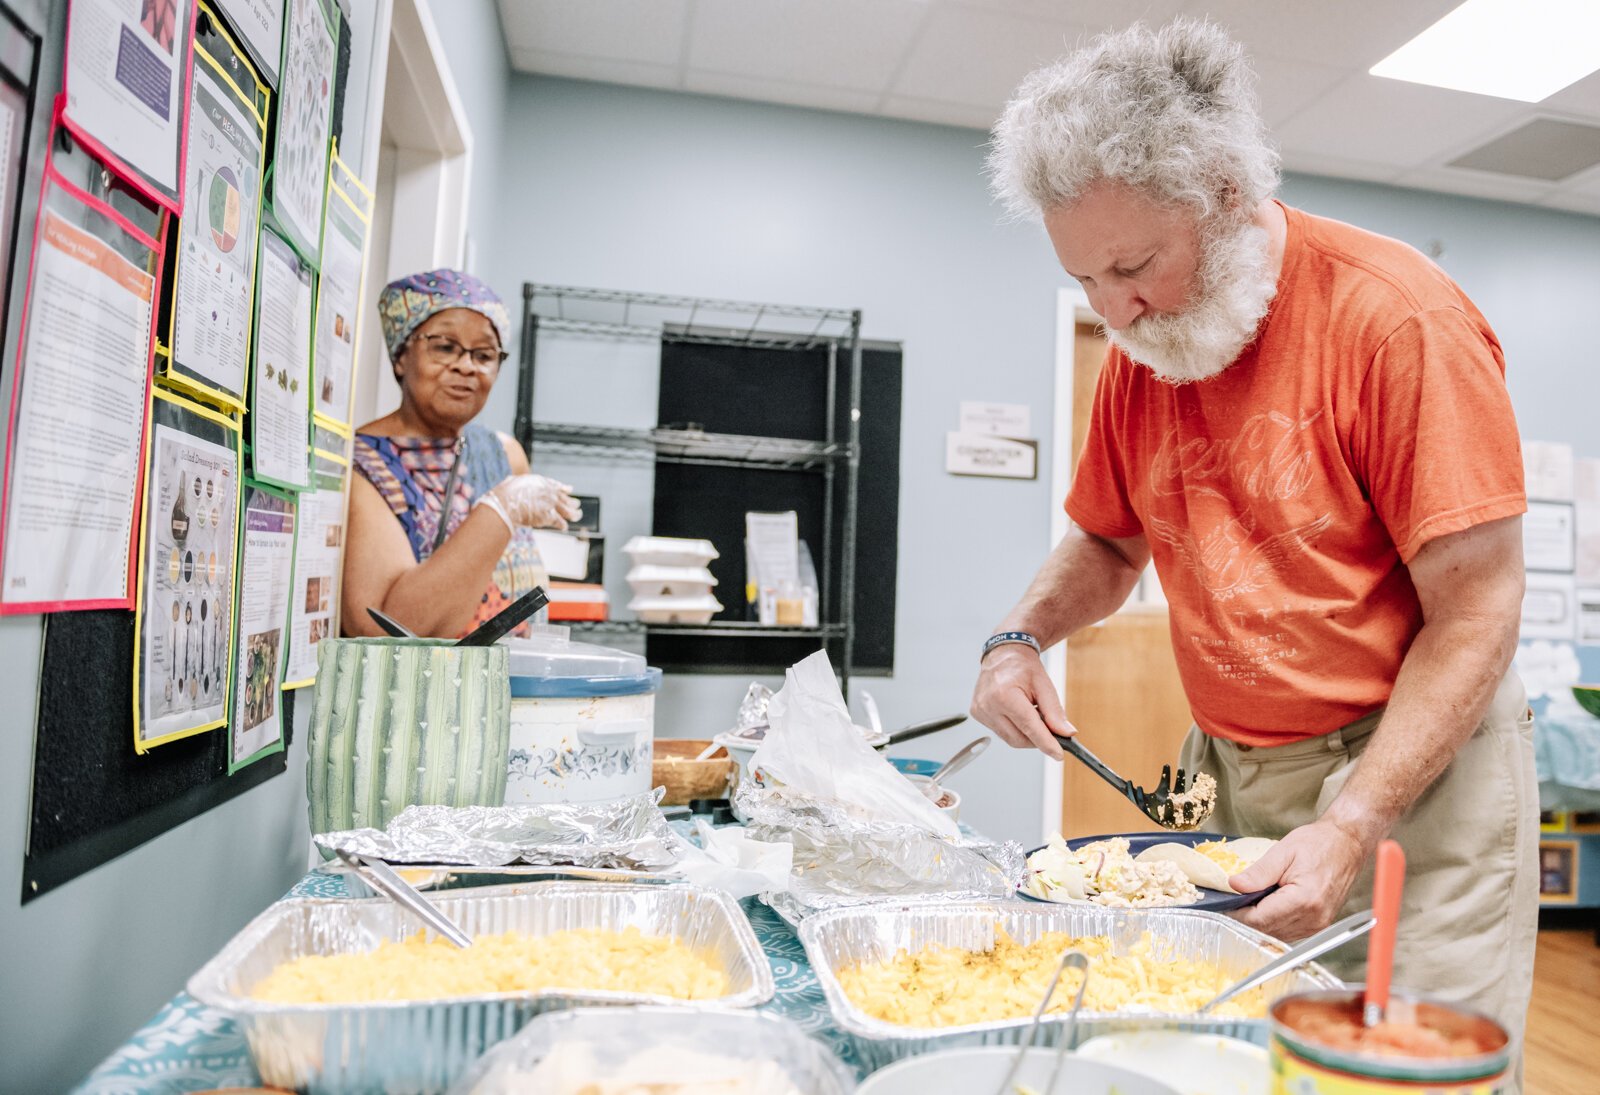 Pete Barbaruolo dips a plate during "Super Saturday" a free monthly community meal for the housing members at River's Edge. River's Edge is a  supportive housing complex on Spy Run Ave. Ext.